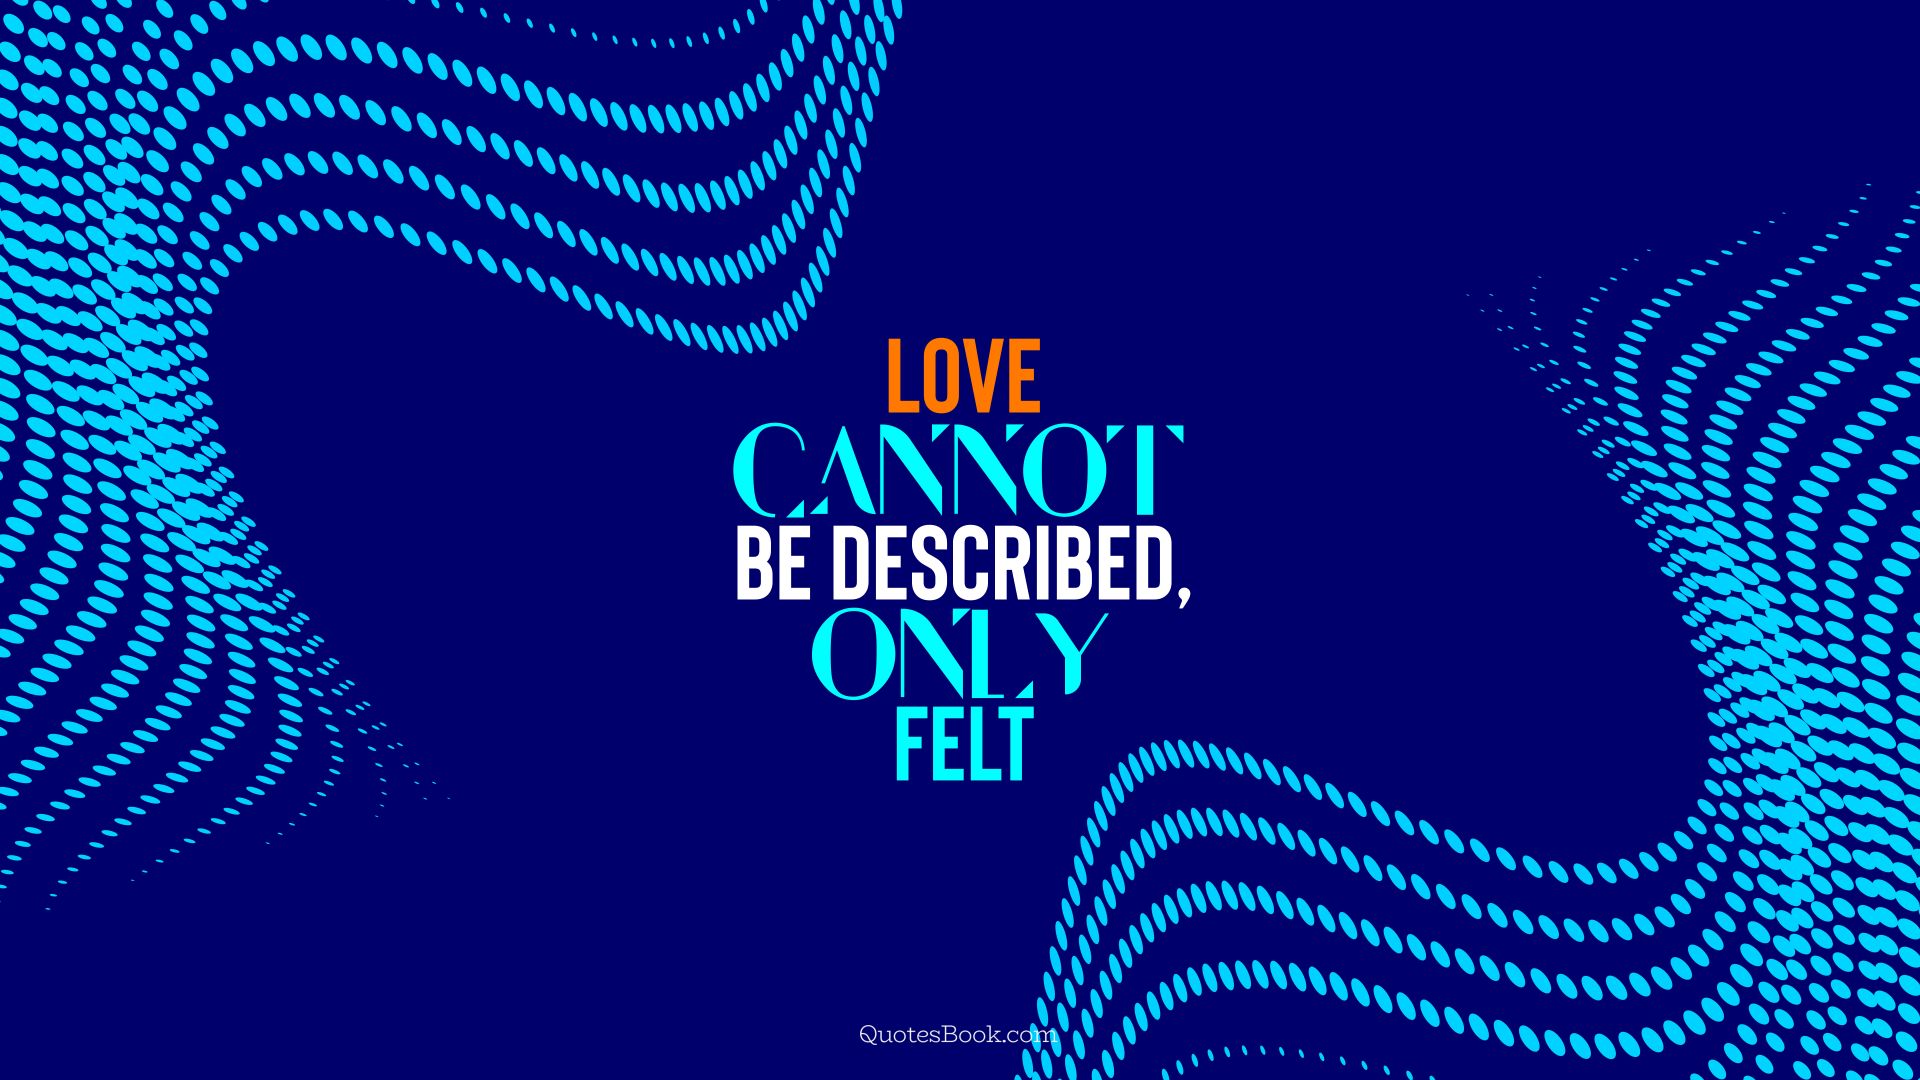 Love cannot be described, only felt. - Quote by QuotesBook